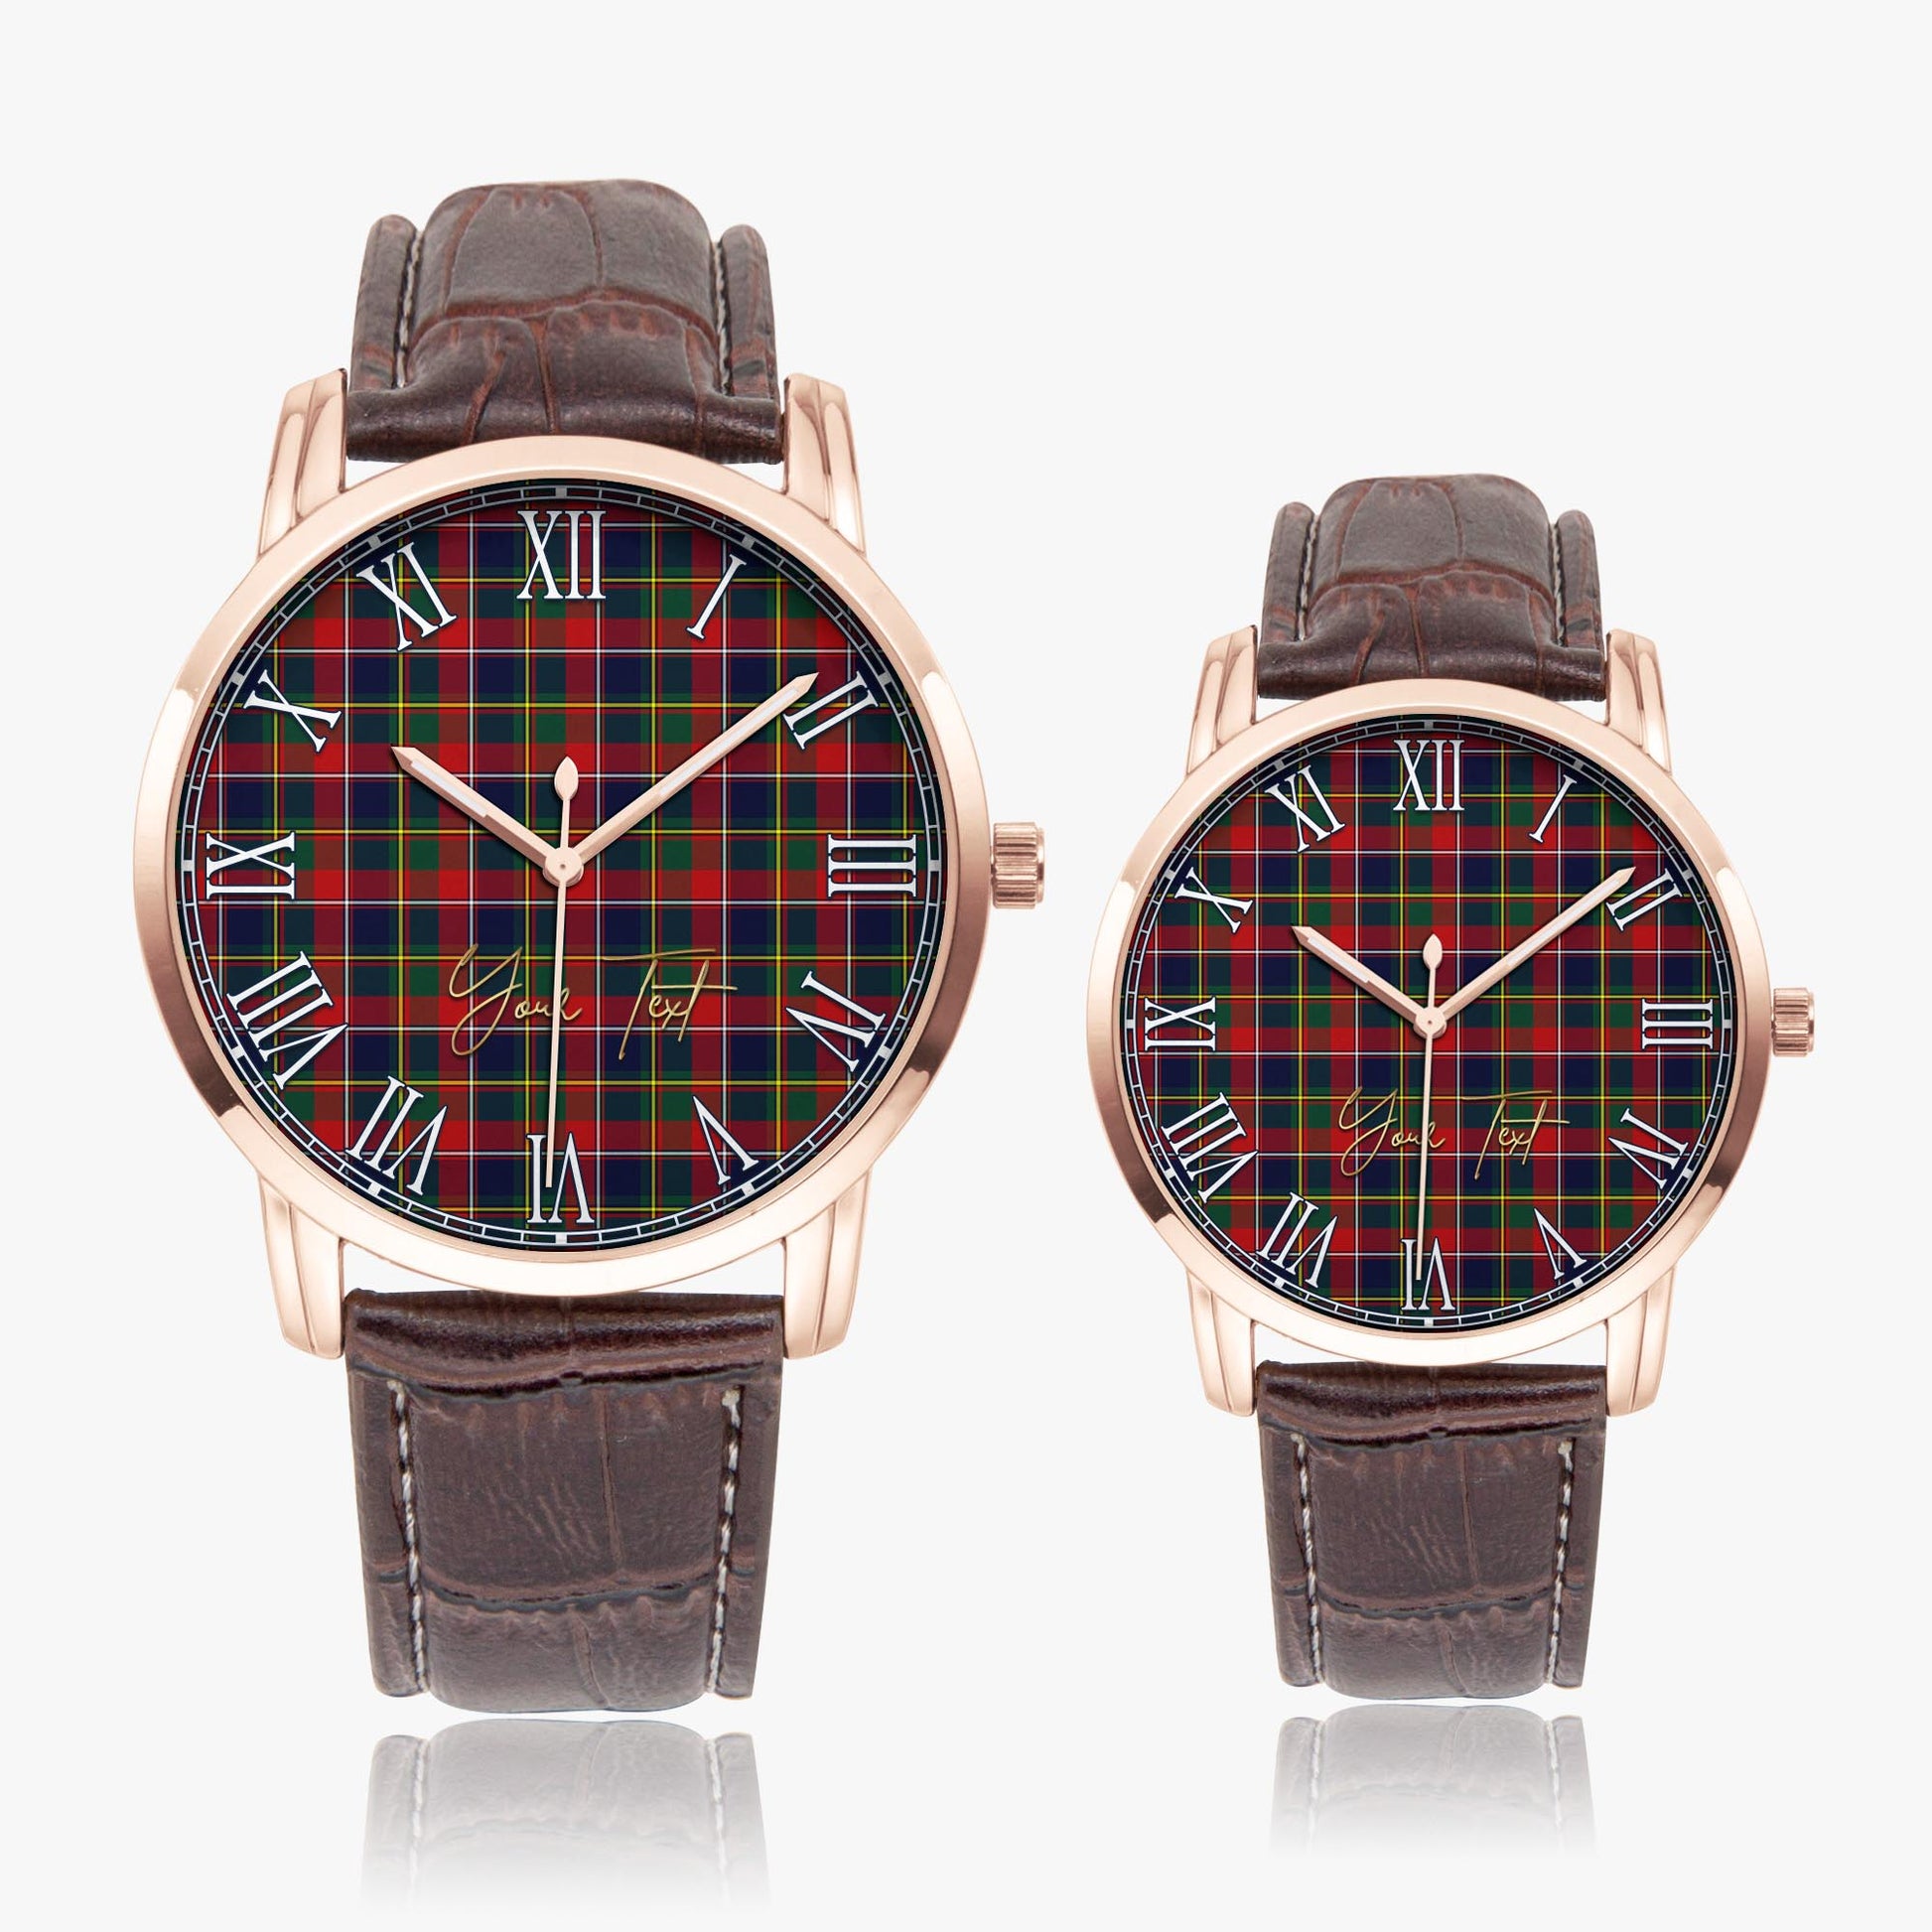 Quebec Province Canada Tartan Personalized Your Text Leather Trap Quartz Watch Wide Type Rose Gold Case With Brown Leather Strap - Tartanvibesclothing